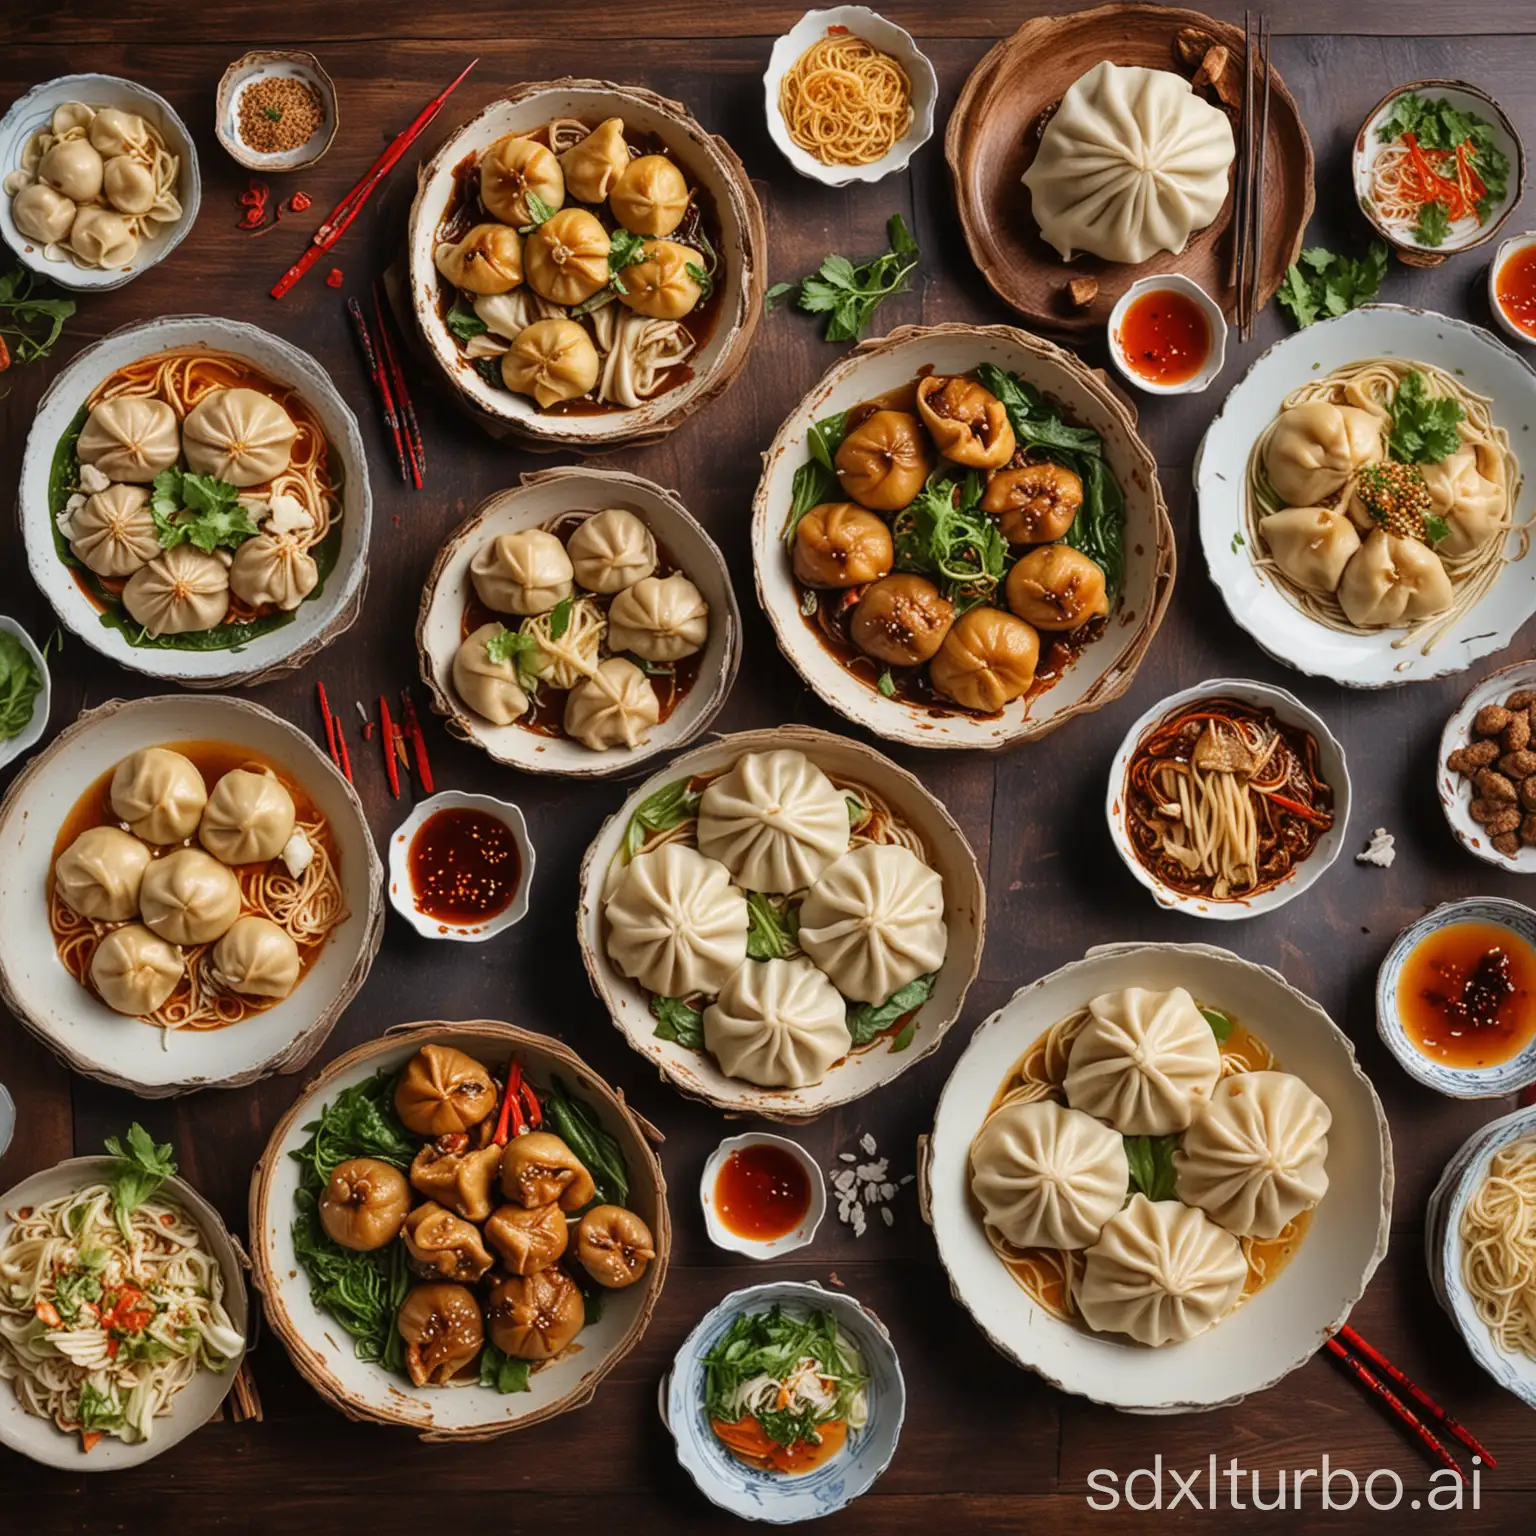 A variety of delicious Asian fusion dishes, such as bao buns, dumplings, and noodles, are arranged on a table. The food is beautifully presented and looks very appetizing.